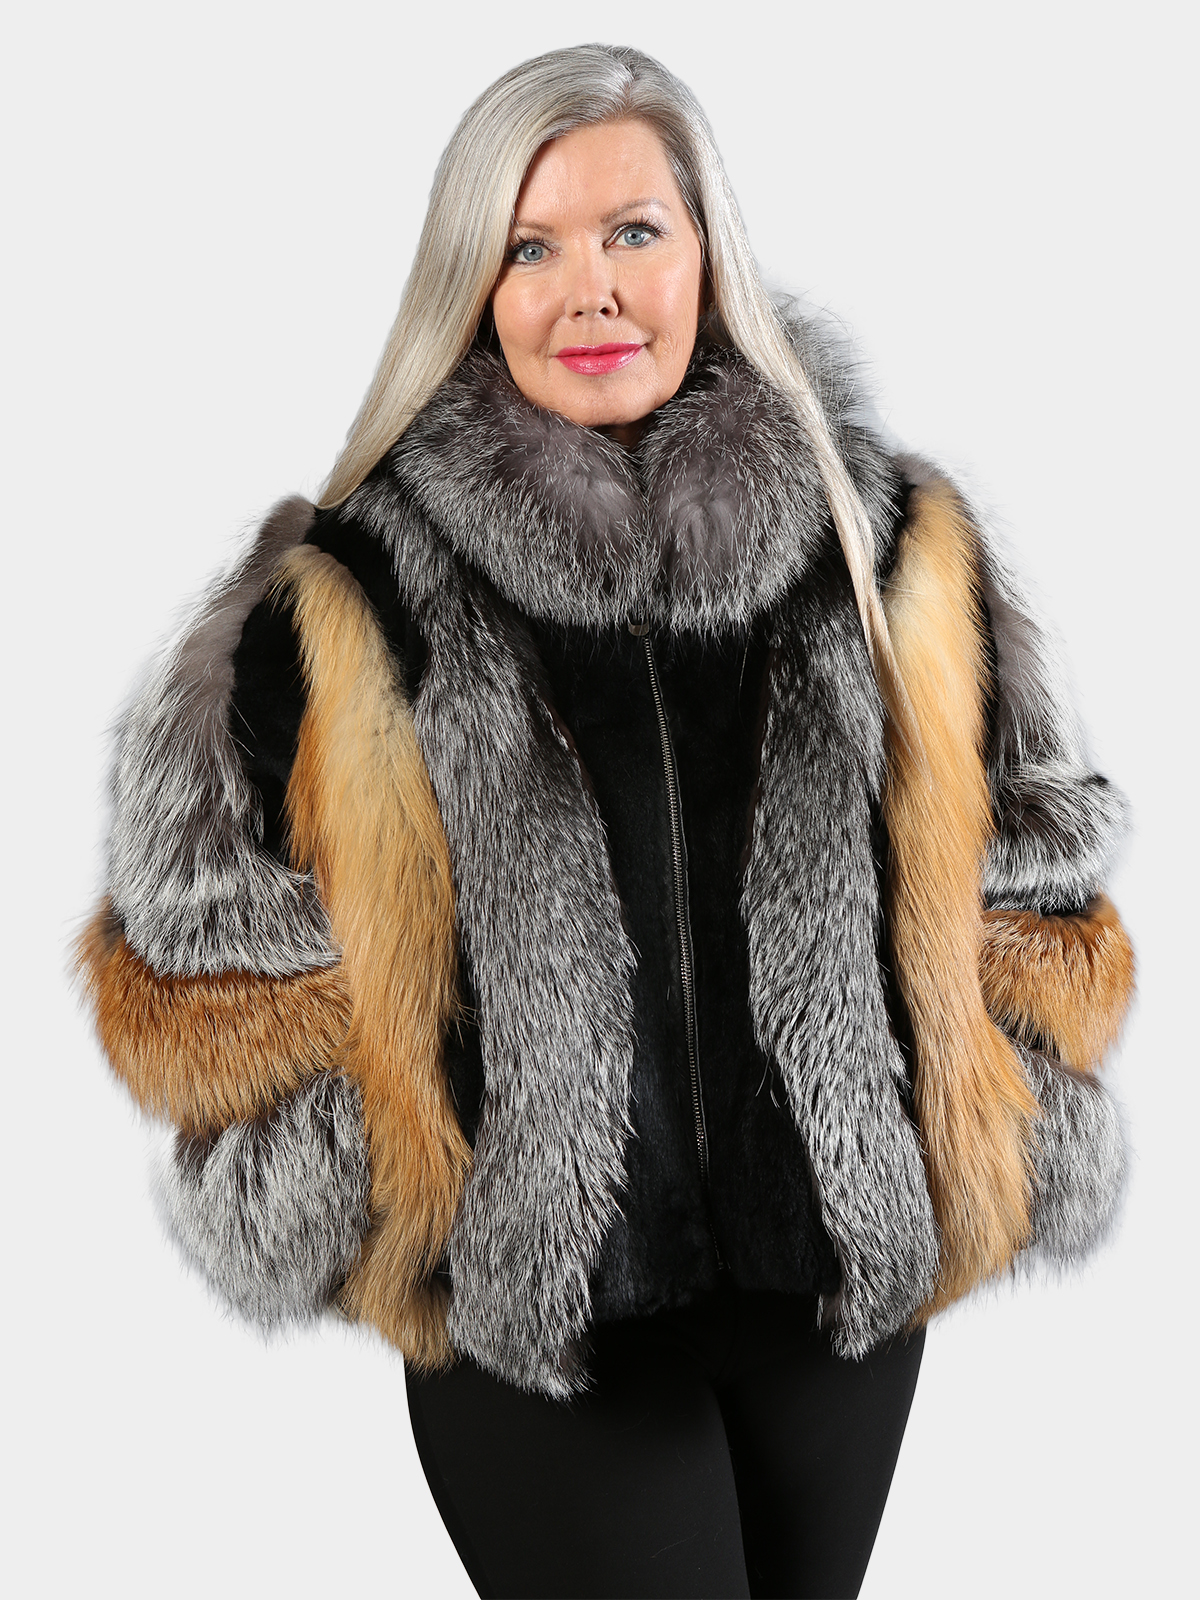 Woman's New Natural Red and Silver Fox Fur Jacket with Rex Rabbit Inserts